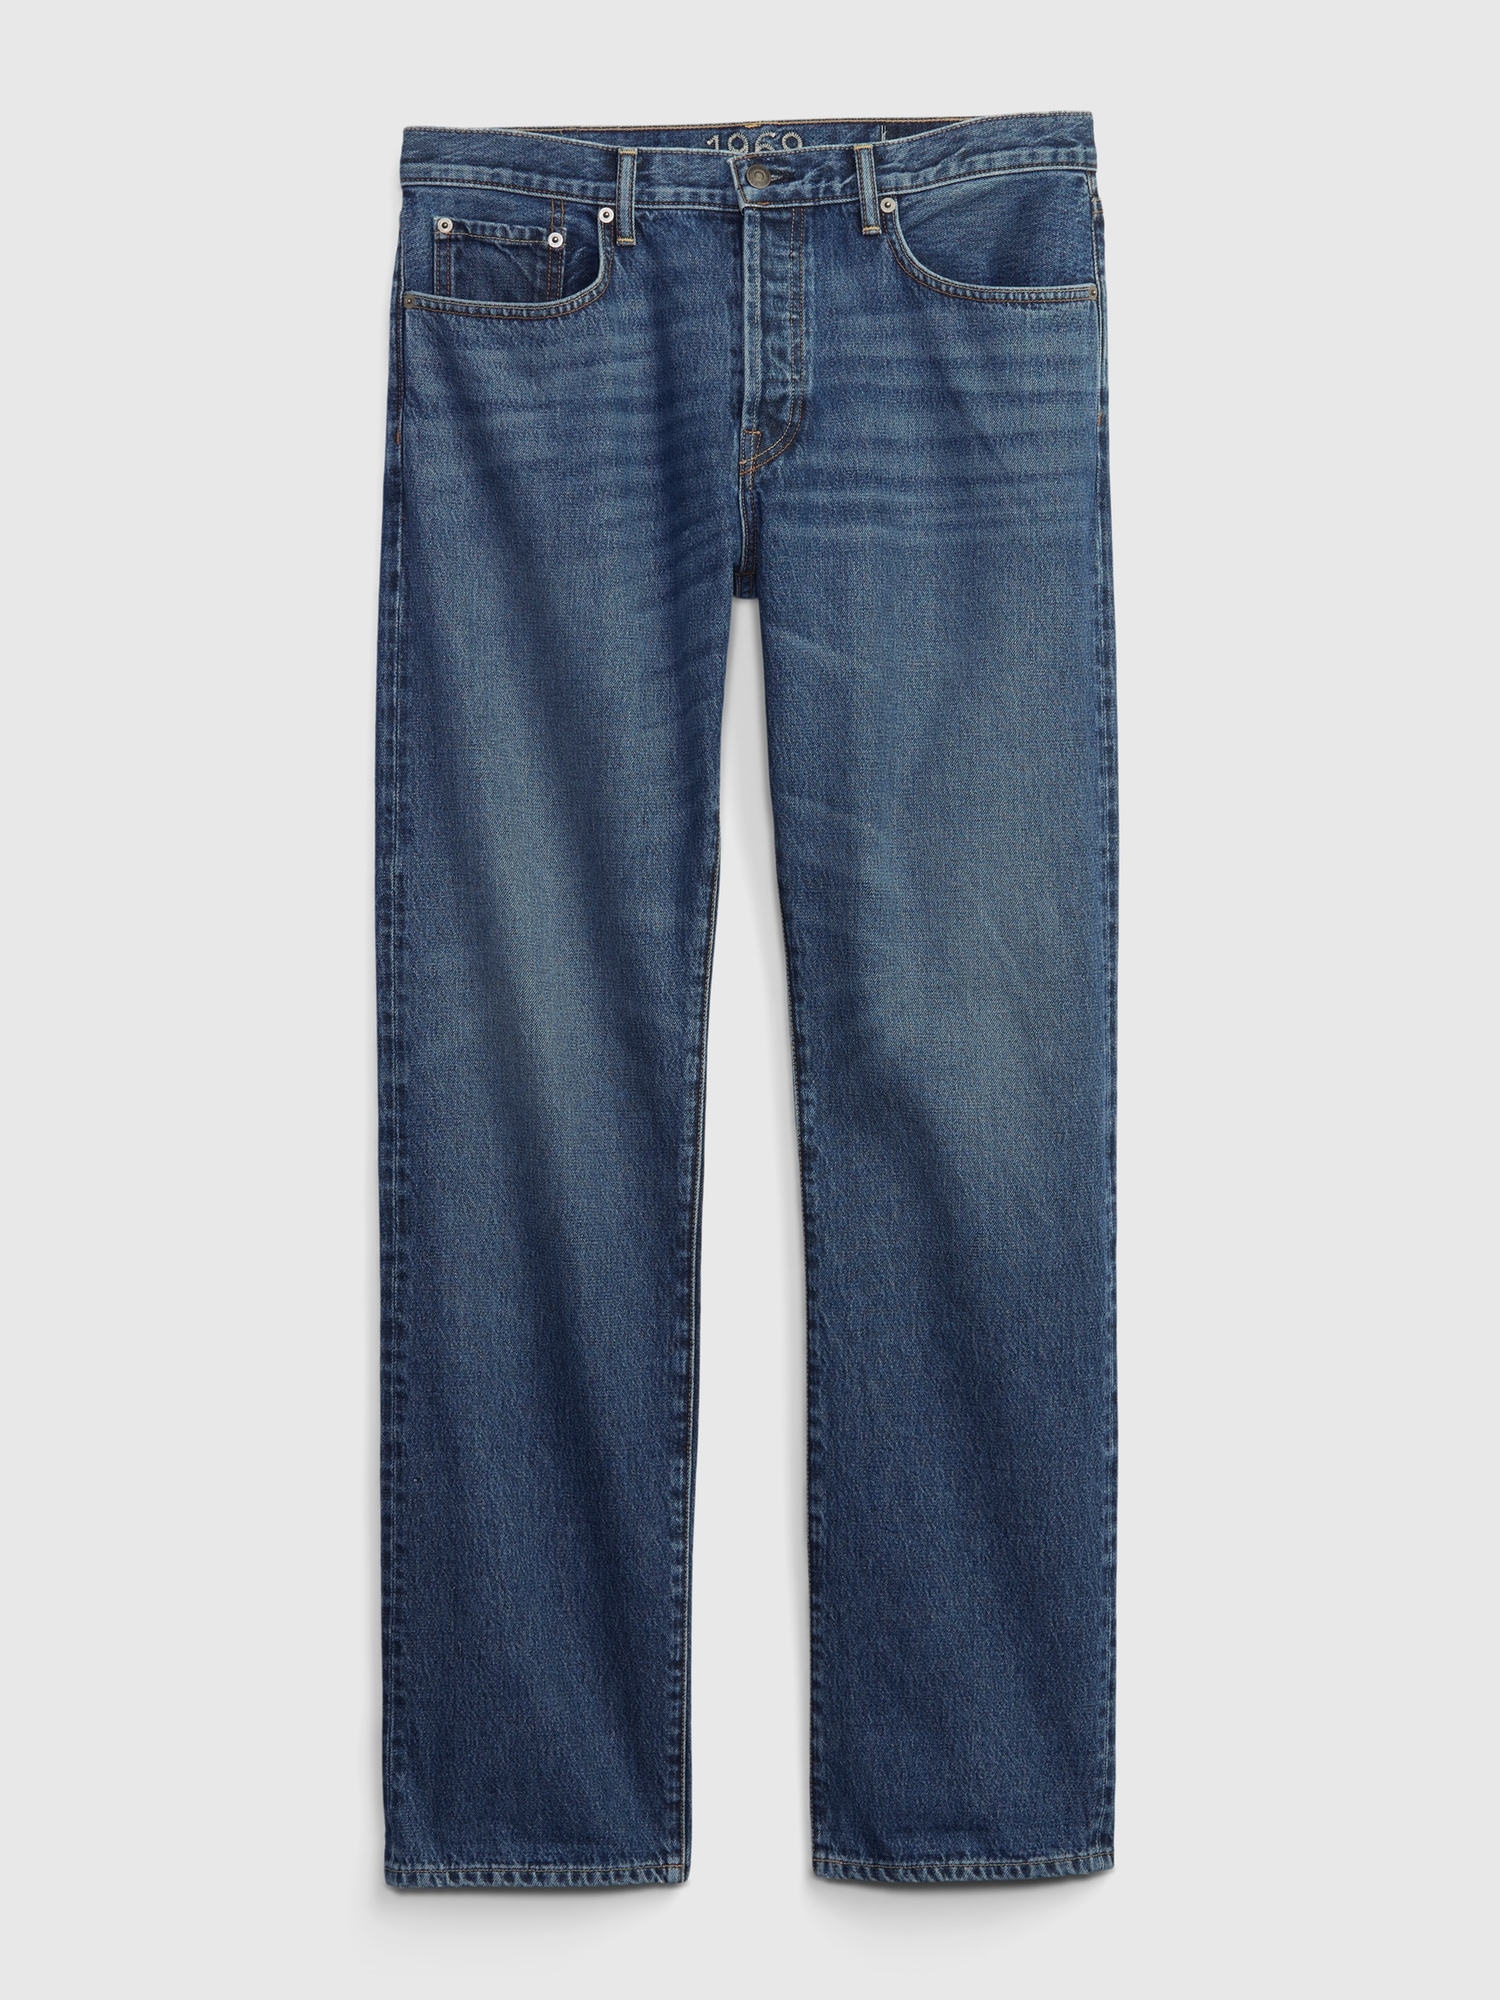 Made in the USA 1969 Premium Straight Fit Jeans